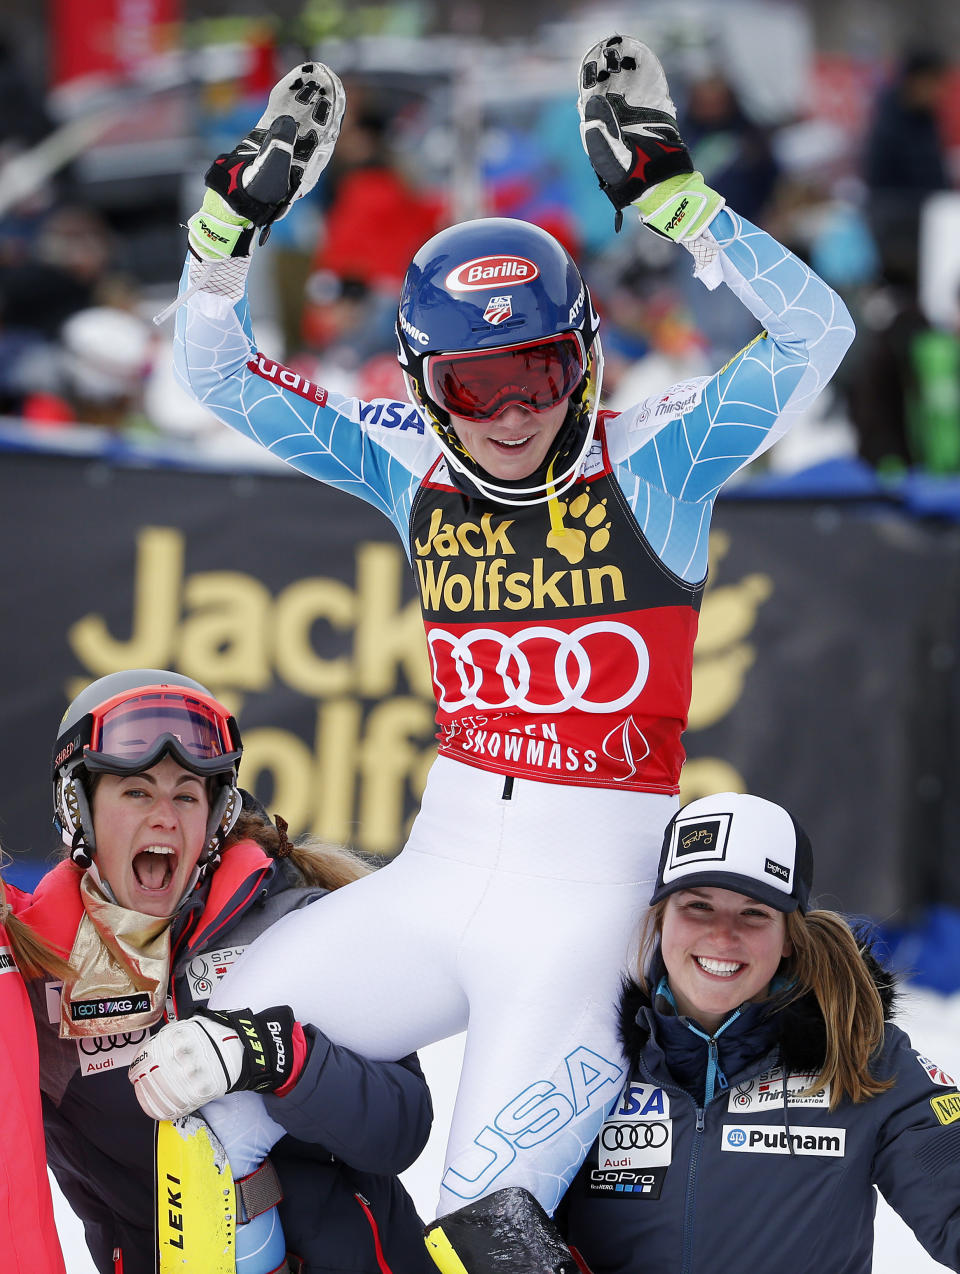 FILE - United States' Mikaela Shiffrin reacts after finishing her second run during the women's World Cup slalom ski race Sunday, Nov. 29, 2015, in Aspen, Colo. Mikaela Shiffrin has matched Lindsey Vonn’s women’s World Cup skiing record with her 82nd win at the women's World Cup giant slalom race, in Kranjska Gora, Slovenia, on Sunday, Jan. 8, 2023. (AP Photo/Brennan Linsley, File)